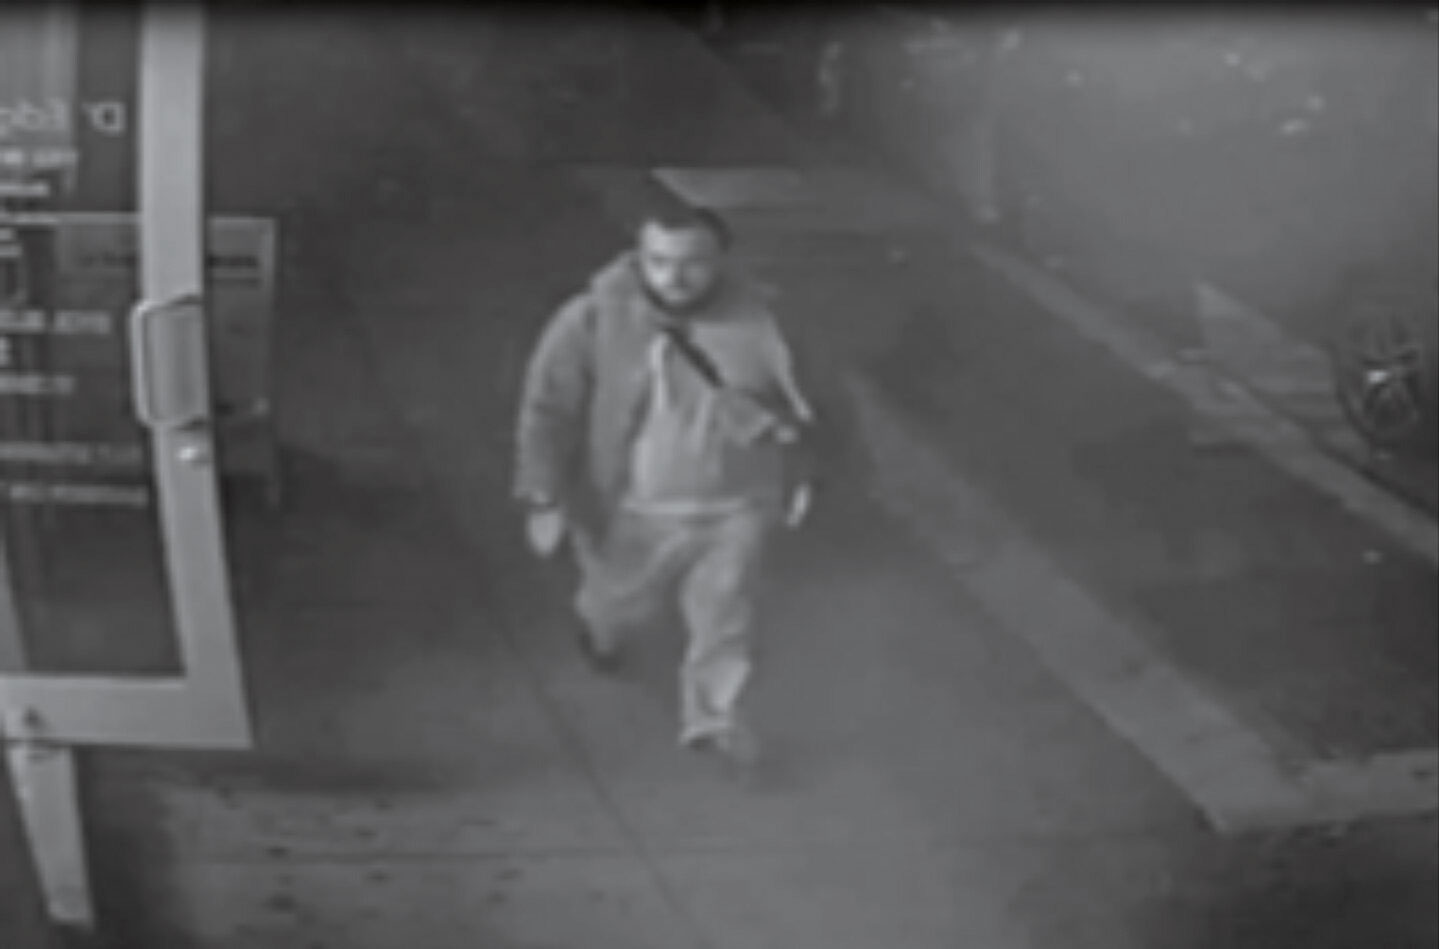 Surveillance footage shows New York City bombing suspect Ahmad Khan Rahami, 28, at the scene of the the explosion